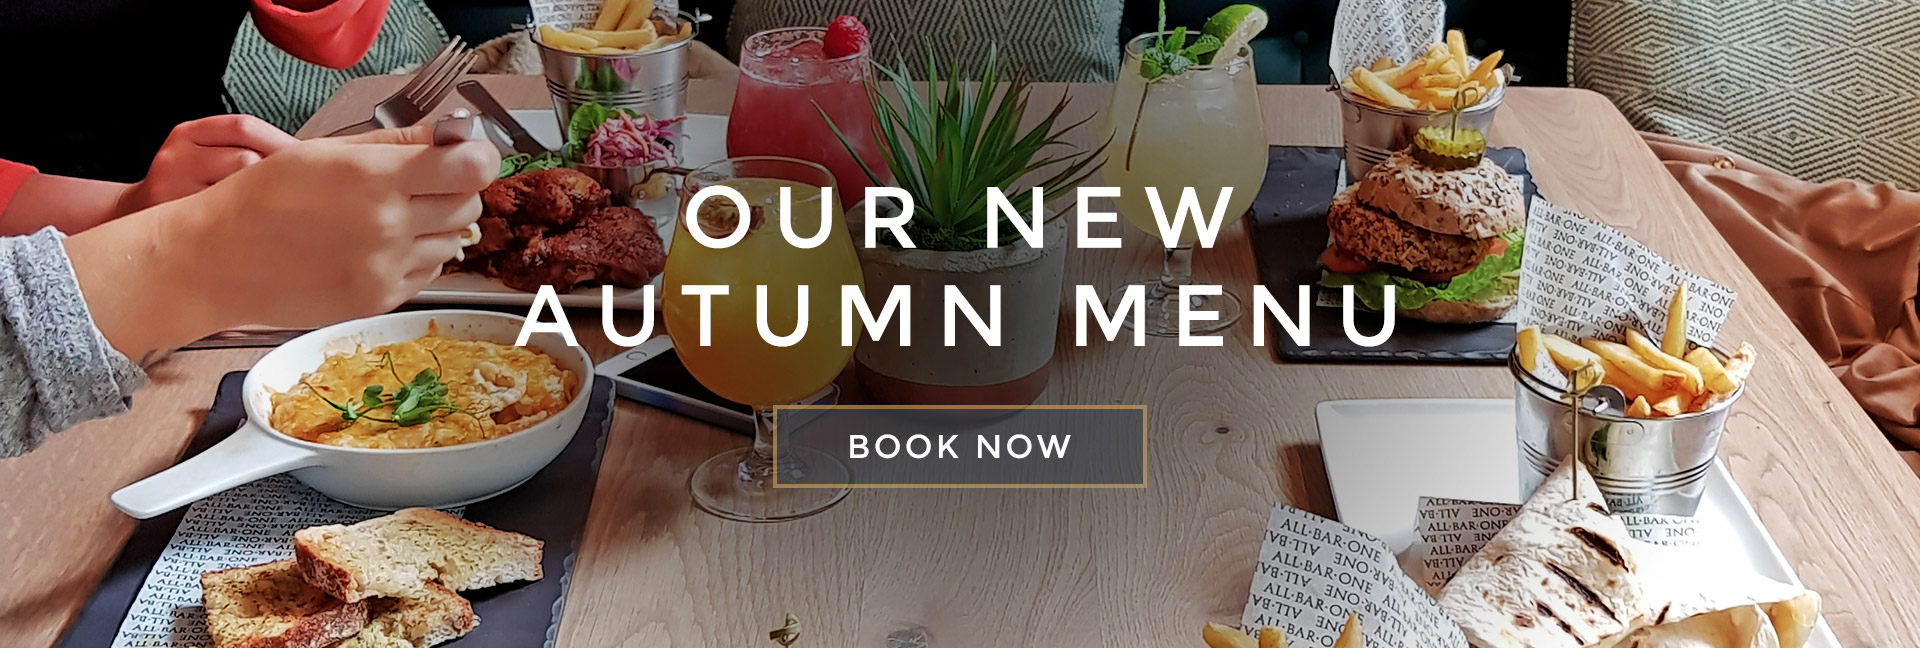 Our new Autumn menu at All Bar One Holborn - Book now